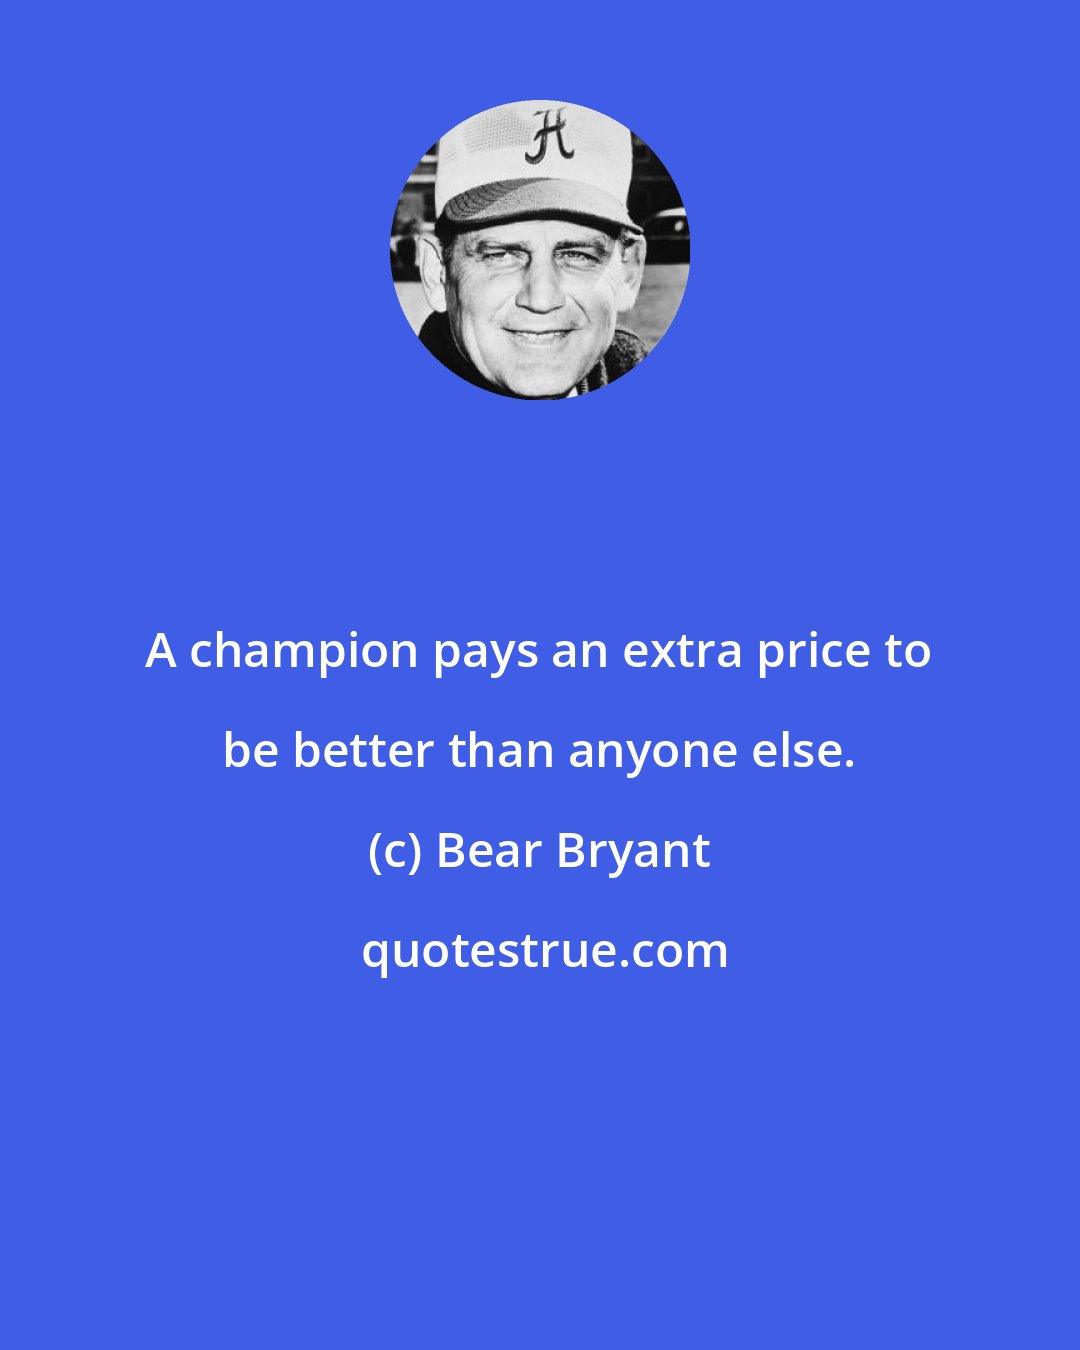 Bear Bryant: A champion pays an extra price to be better than anyone else.